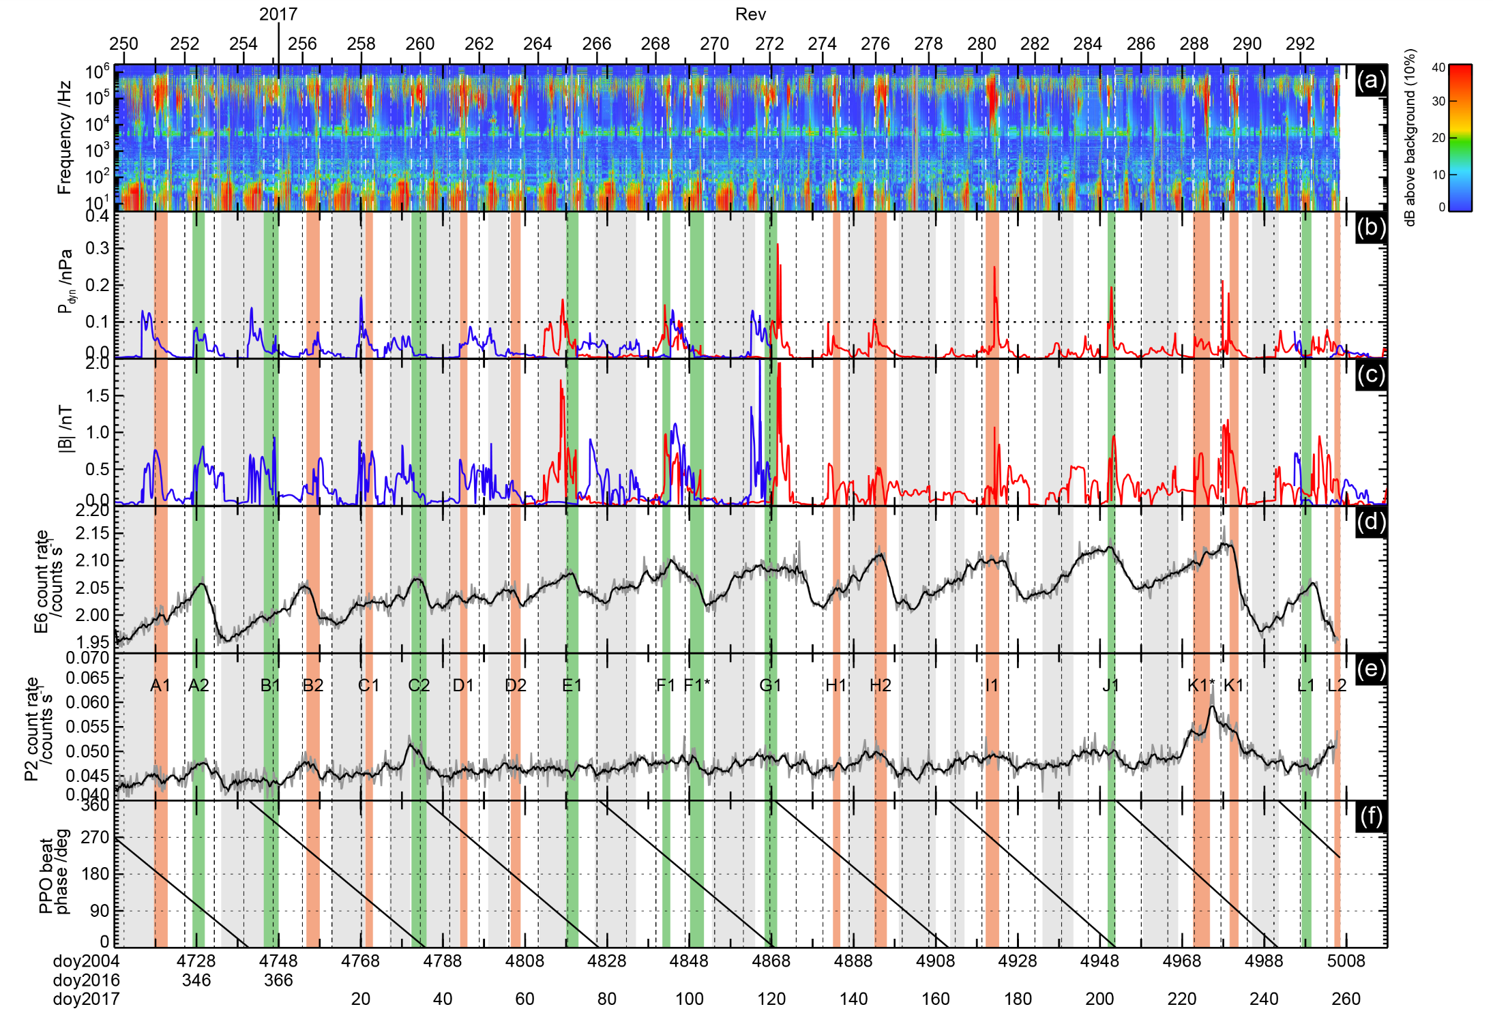 Overview of the dataset showing time series of solar wind data, particle fluxes, and PPO phase.